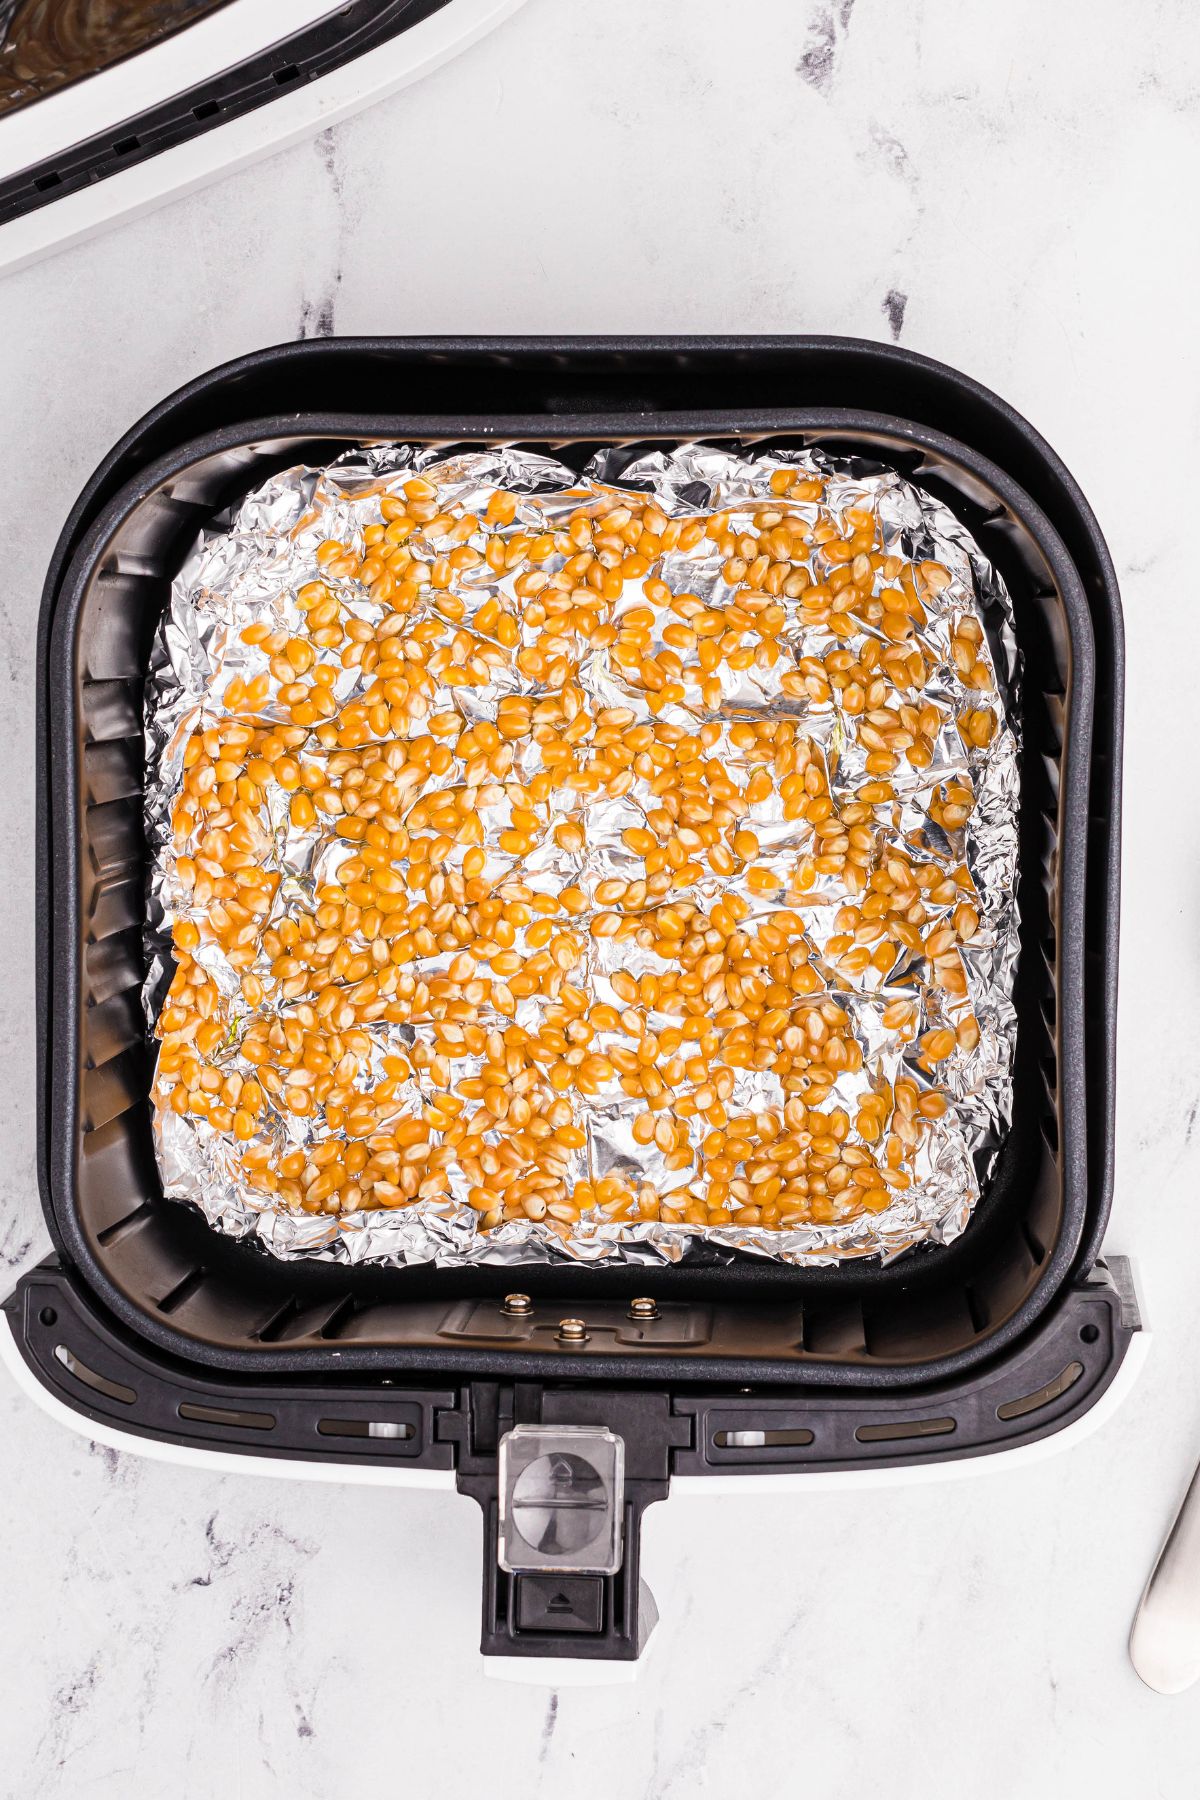 Unpopped kernals in the air fryer basket on top of foil